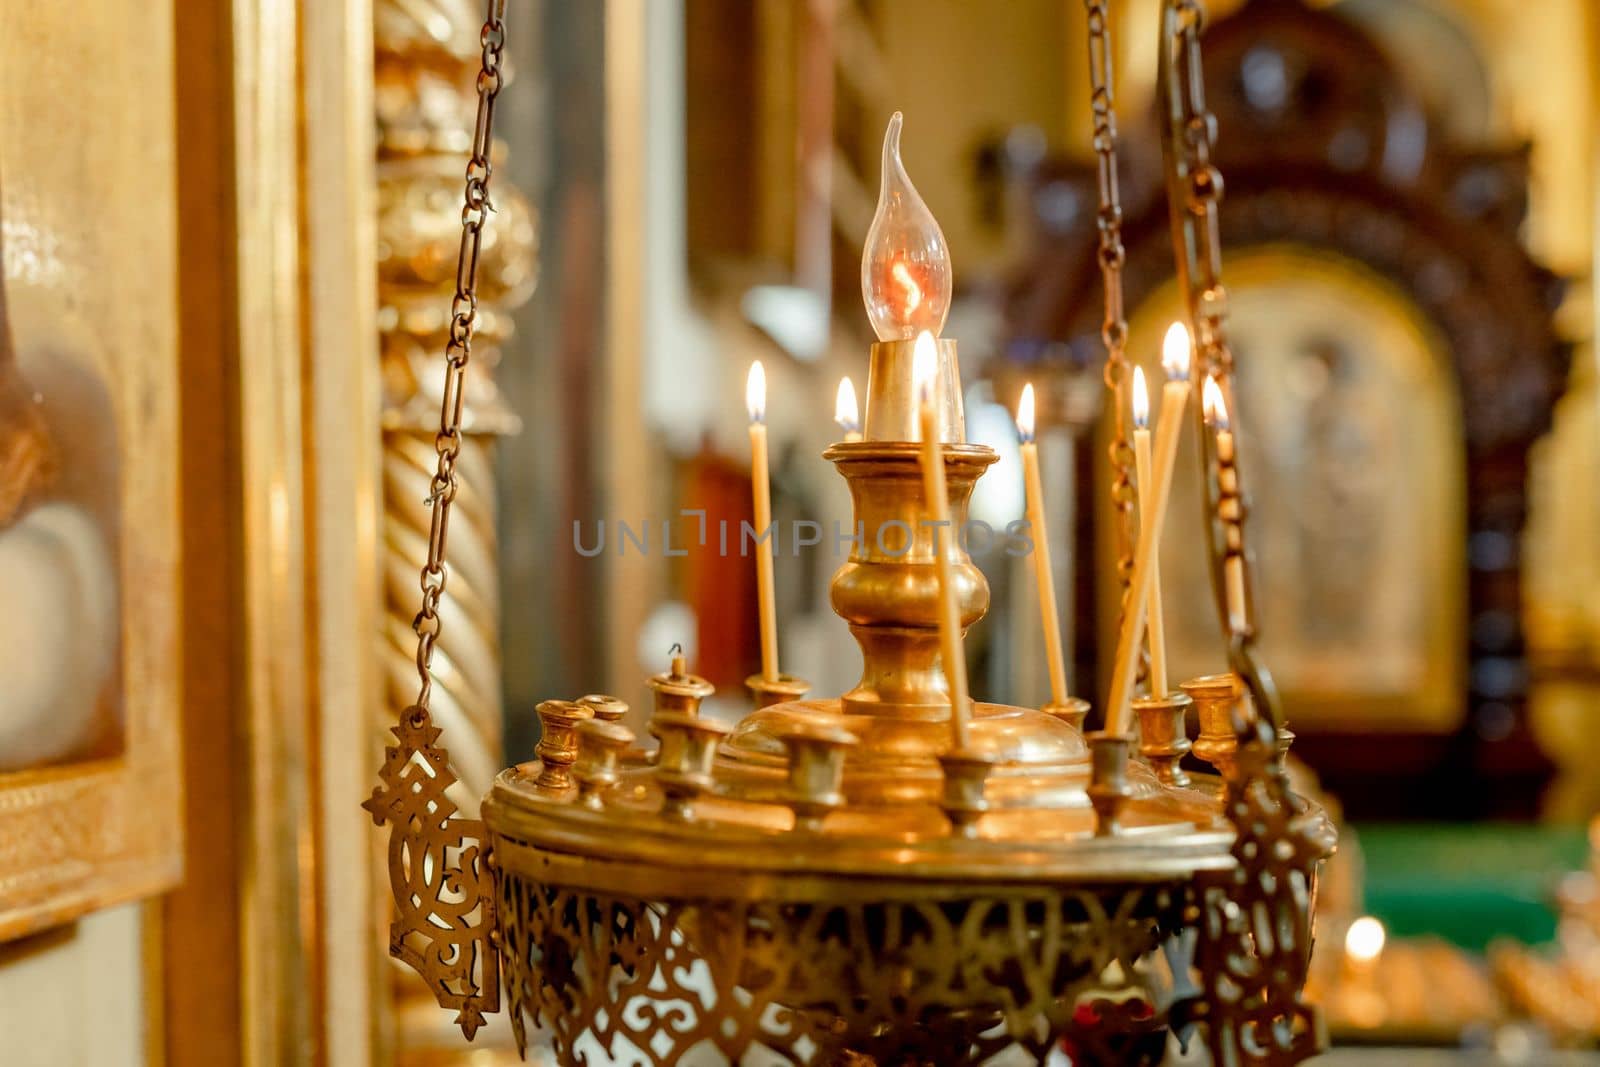 Orthodox Church. Christianity. Festive interior decoration with burning candles and icon in traditional Orthodox Church on Easter Eve or Christmas. Religion faith pray symbol